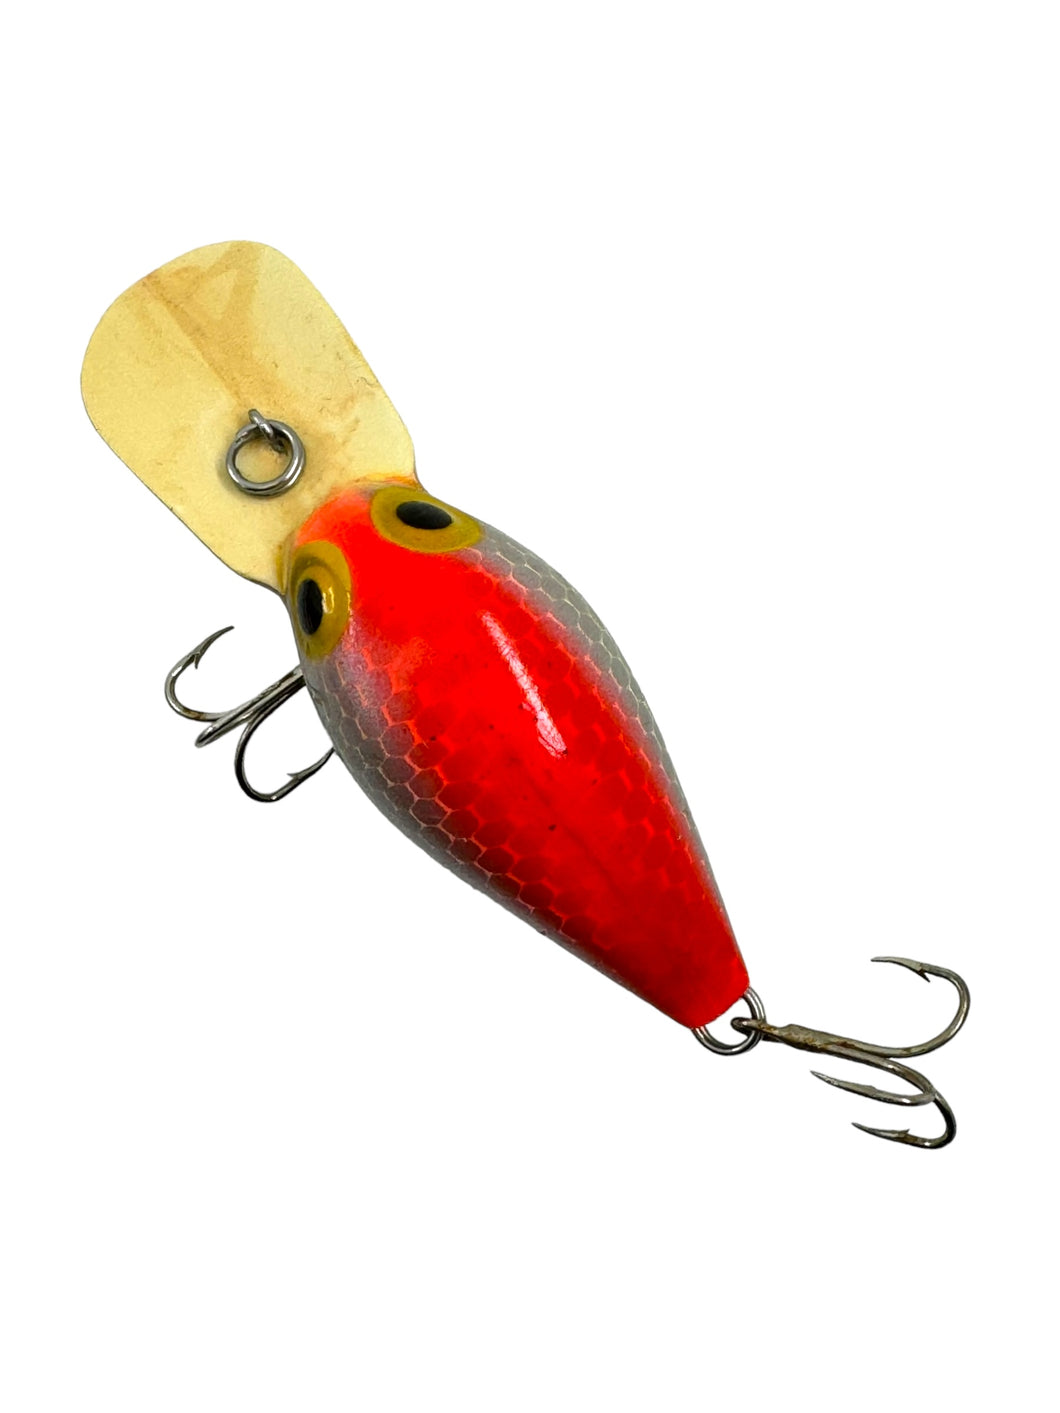 Back View of STORM LURES WIGGLE WART Fishing Lure in FLUORESCENT RED STRIPE. Rare V8 Color!